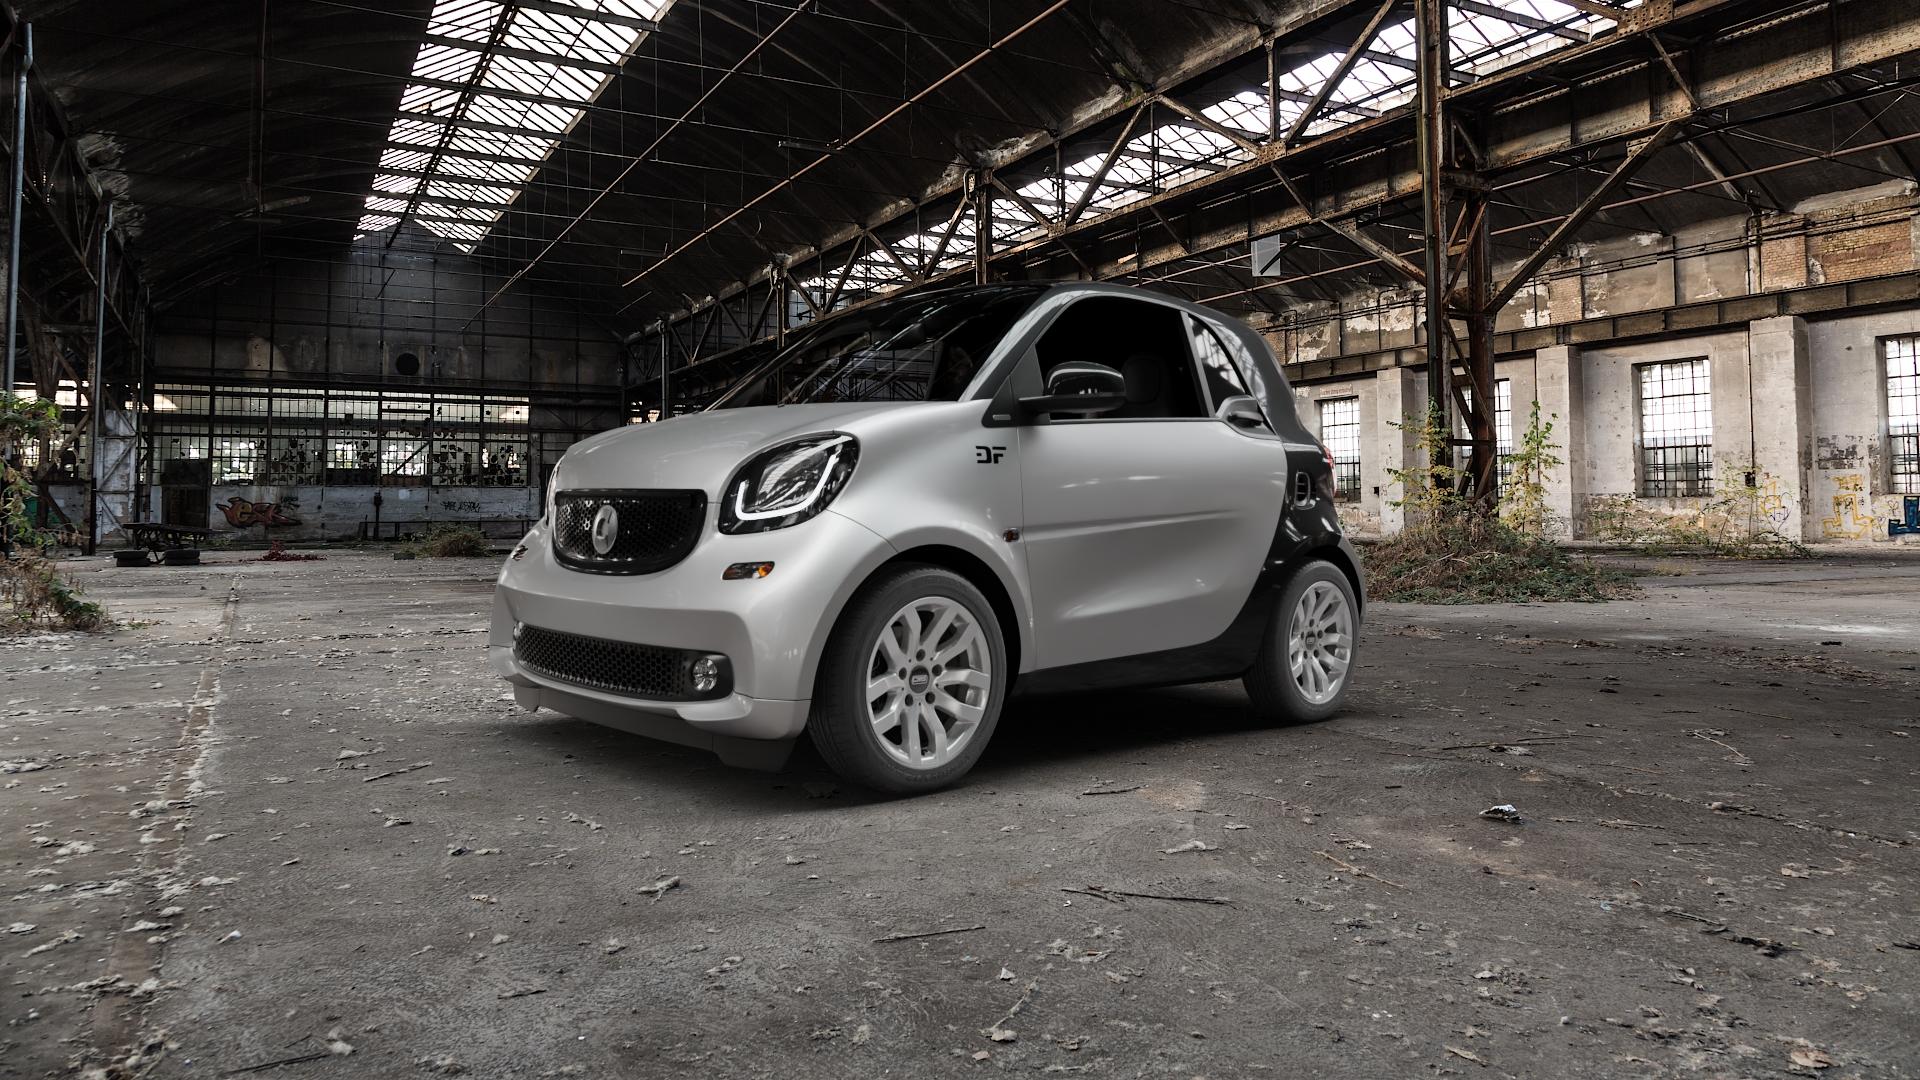 CMS C22 Racing Silver Felge mit Reifen silber in 15Zoll Winterfelge Alufelge auf silbernem Smart Fortwo Coupe III (14-) (453) ⬇️ mit 15mm Tieferlegung ⬇️ Old Industrial Hall_max5000mm_2022 Frontansicht_1